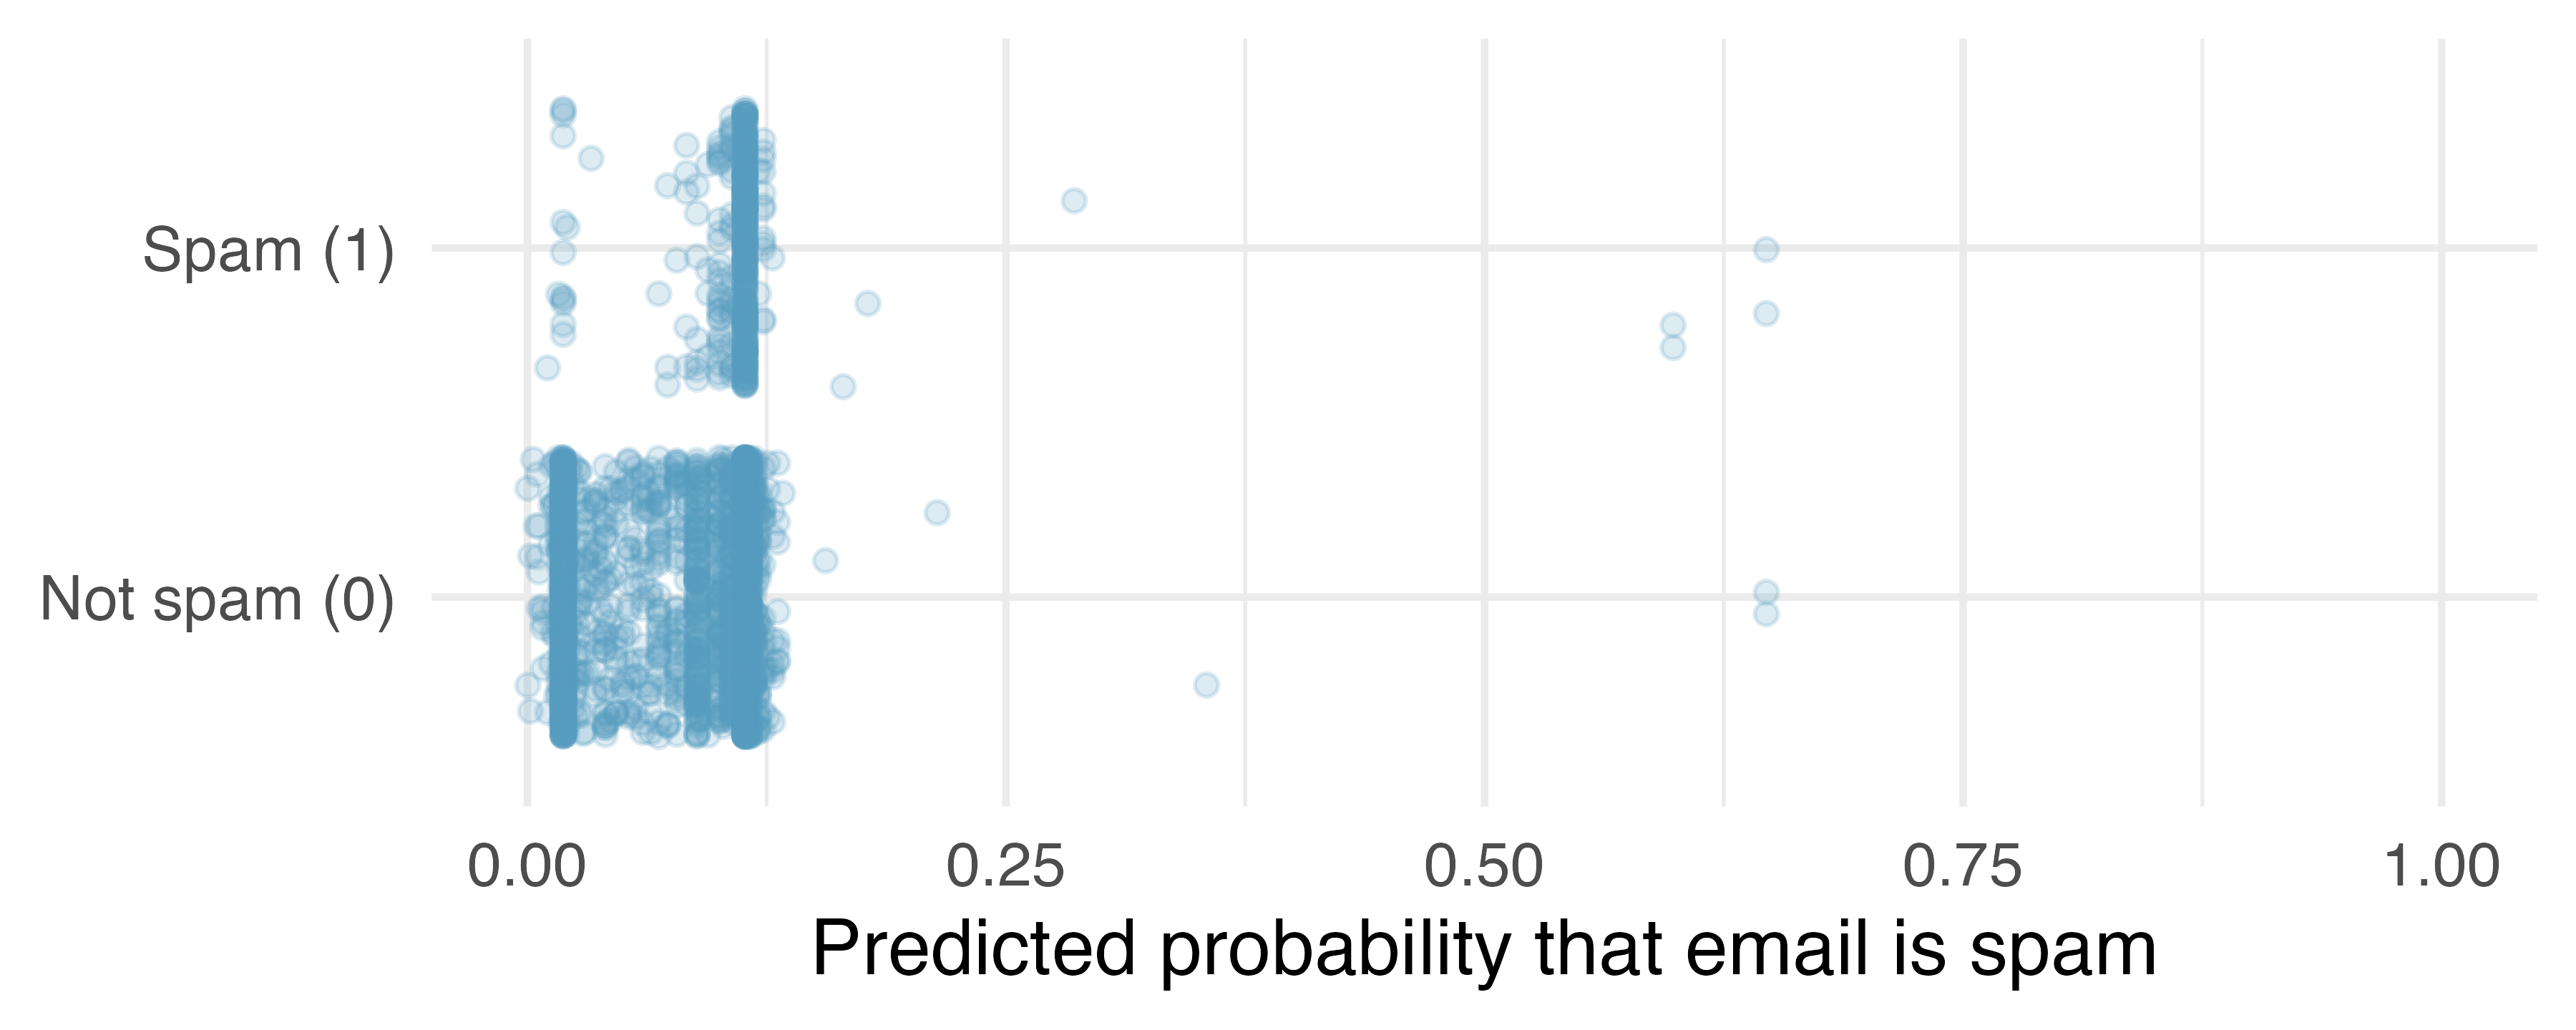 The predicted probability that each of the 3921 emails that are spam. Points have been jittered so that those with nearly identical values aren’t plotted exactly on top of one another.